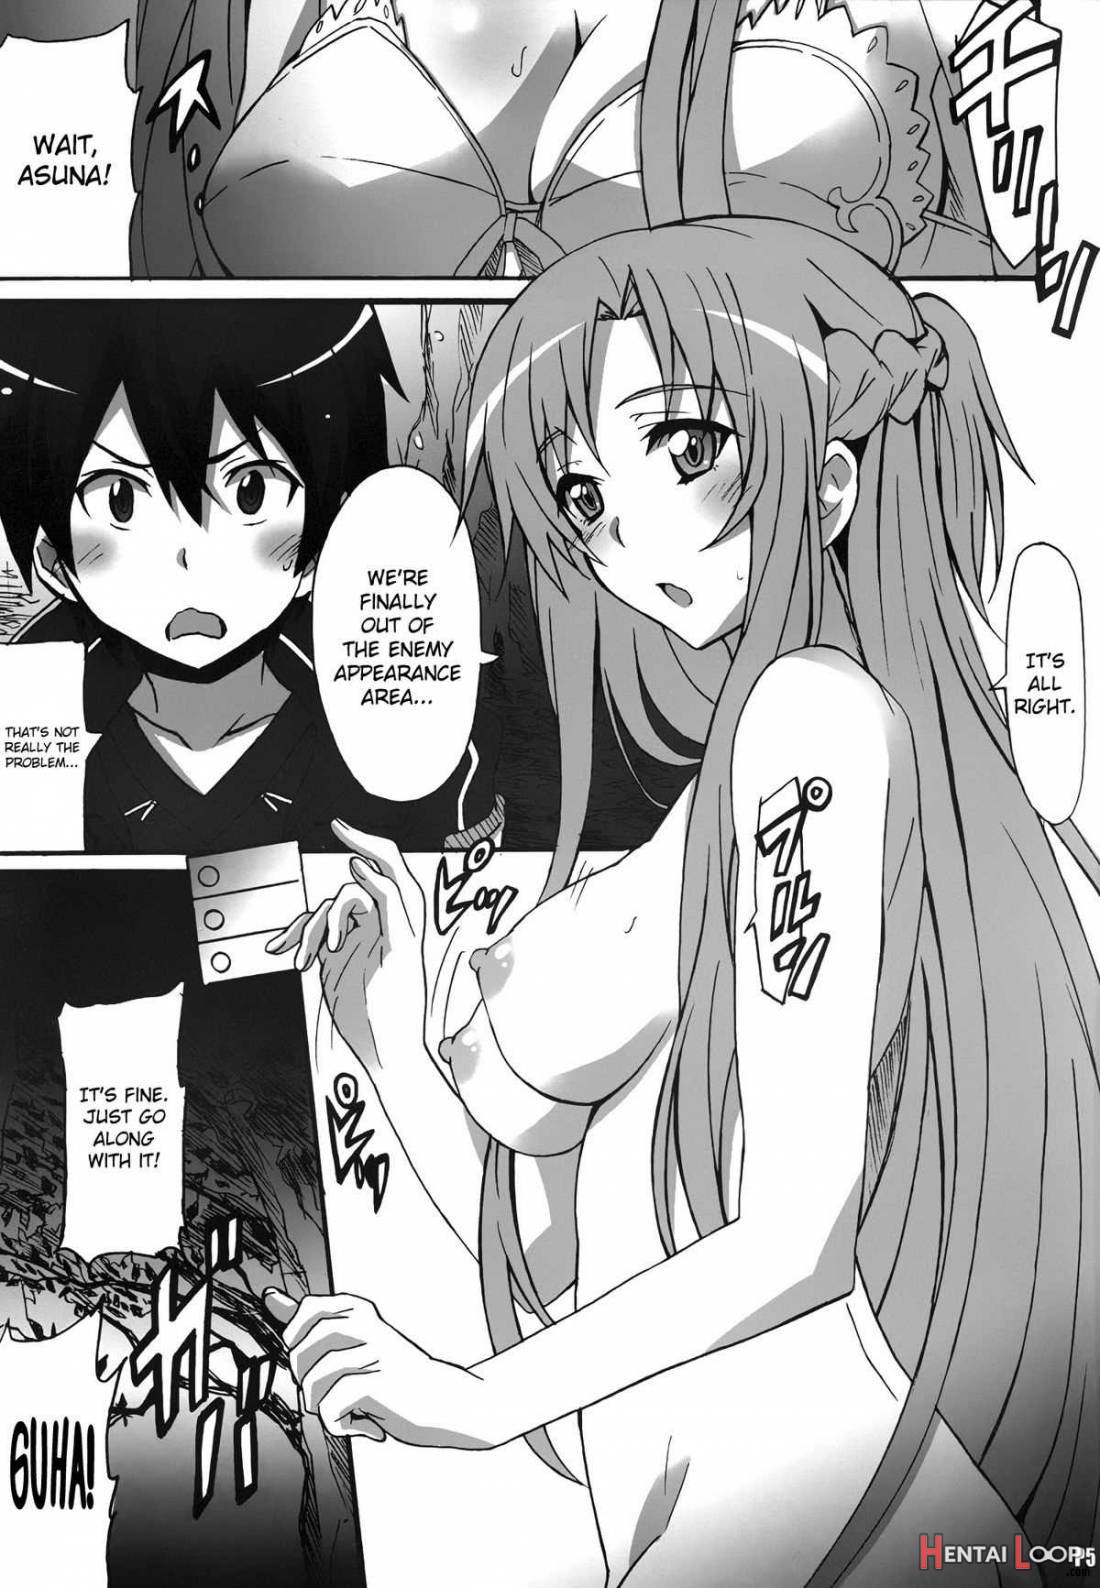 Sword Art Online Hollow Sensual page 4